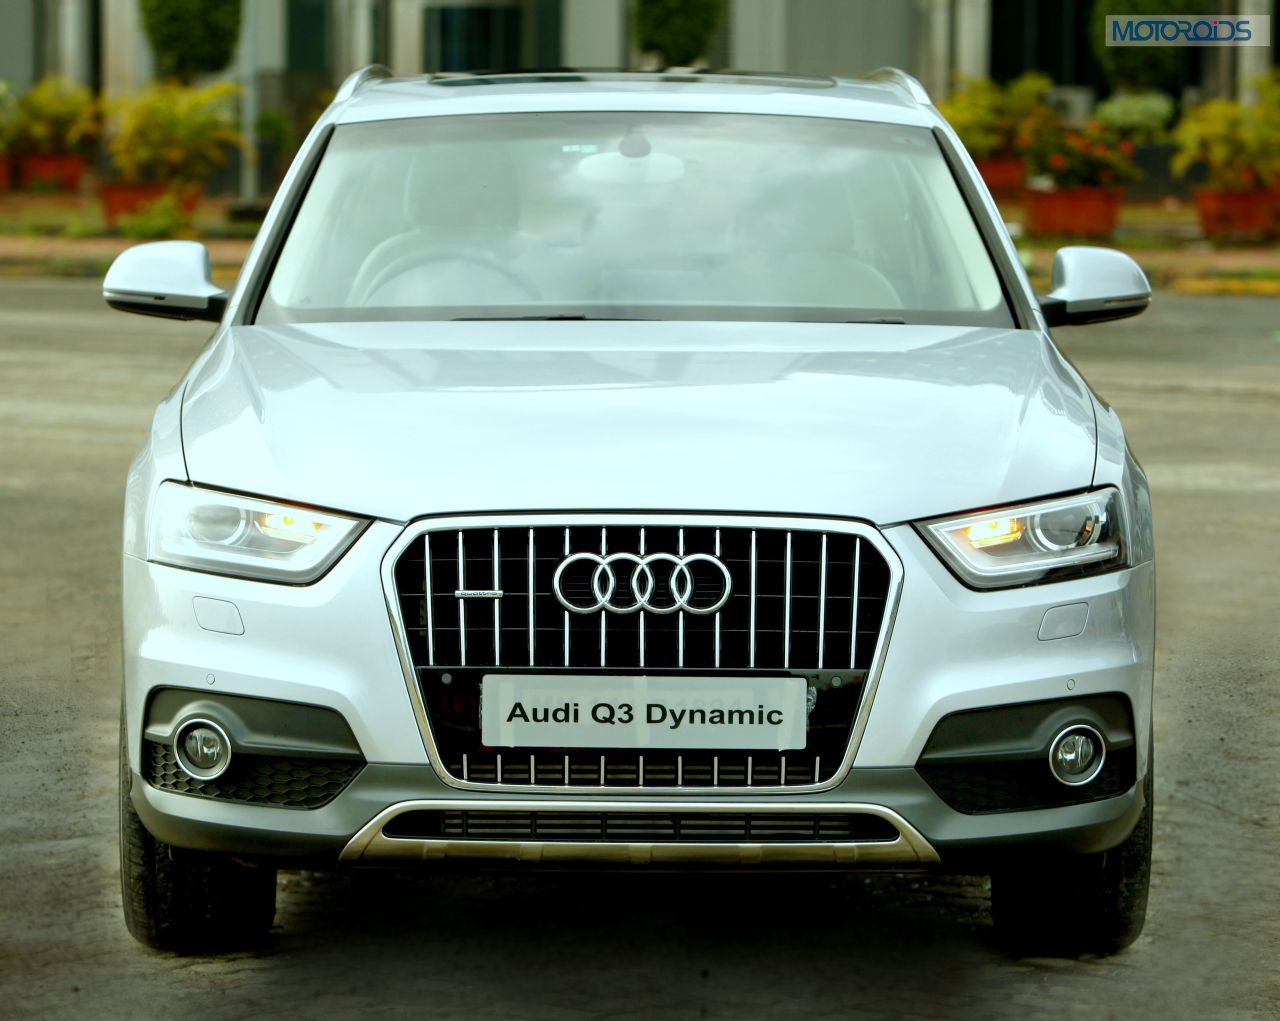 New Car Launch: Audi Q3 Dynamic launched in India | Motoroids